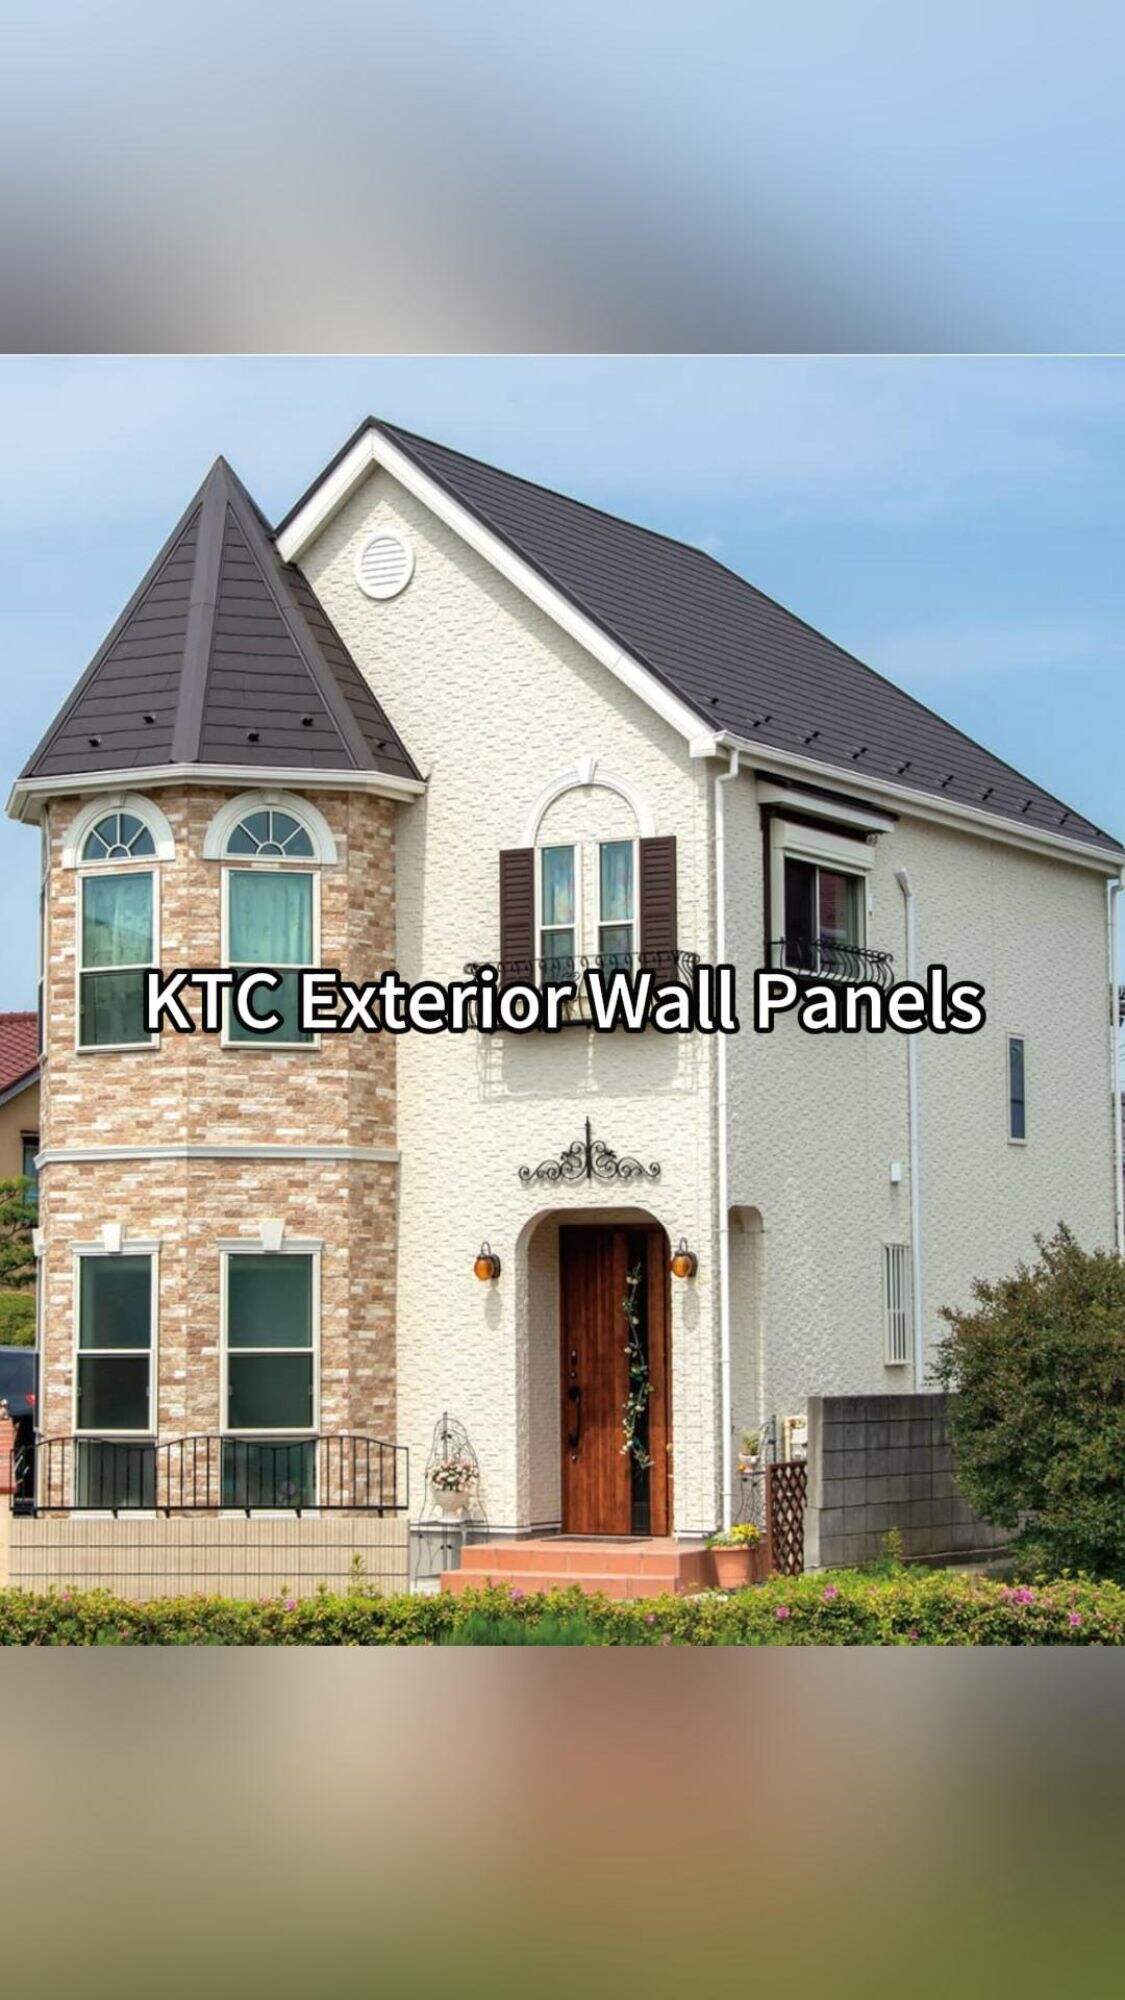 Self-cleaning KTC Exterior Panel